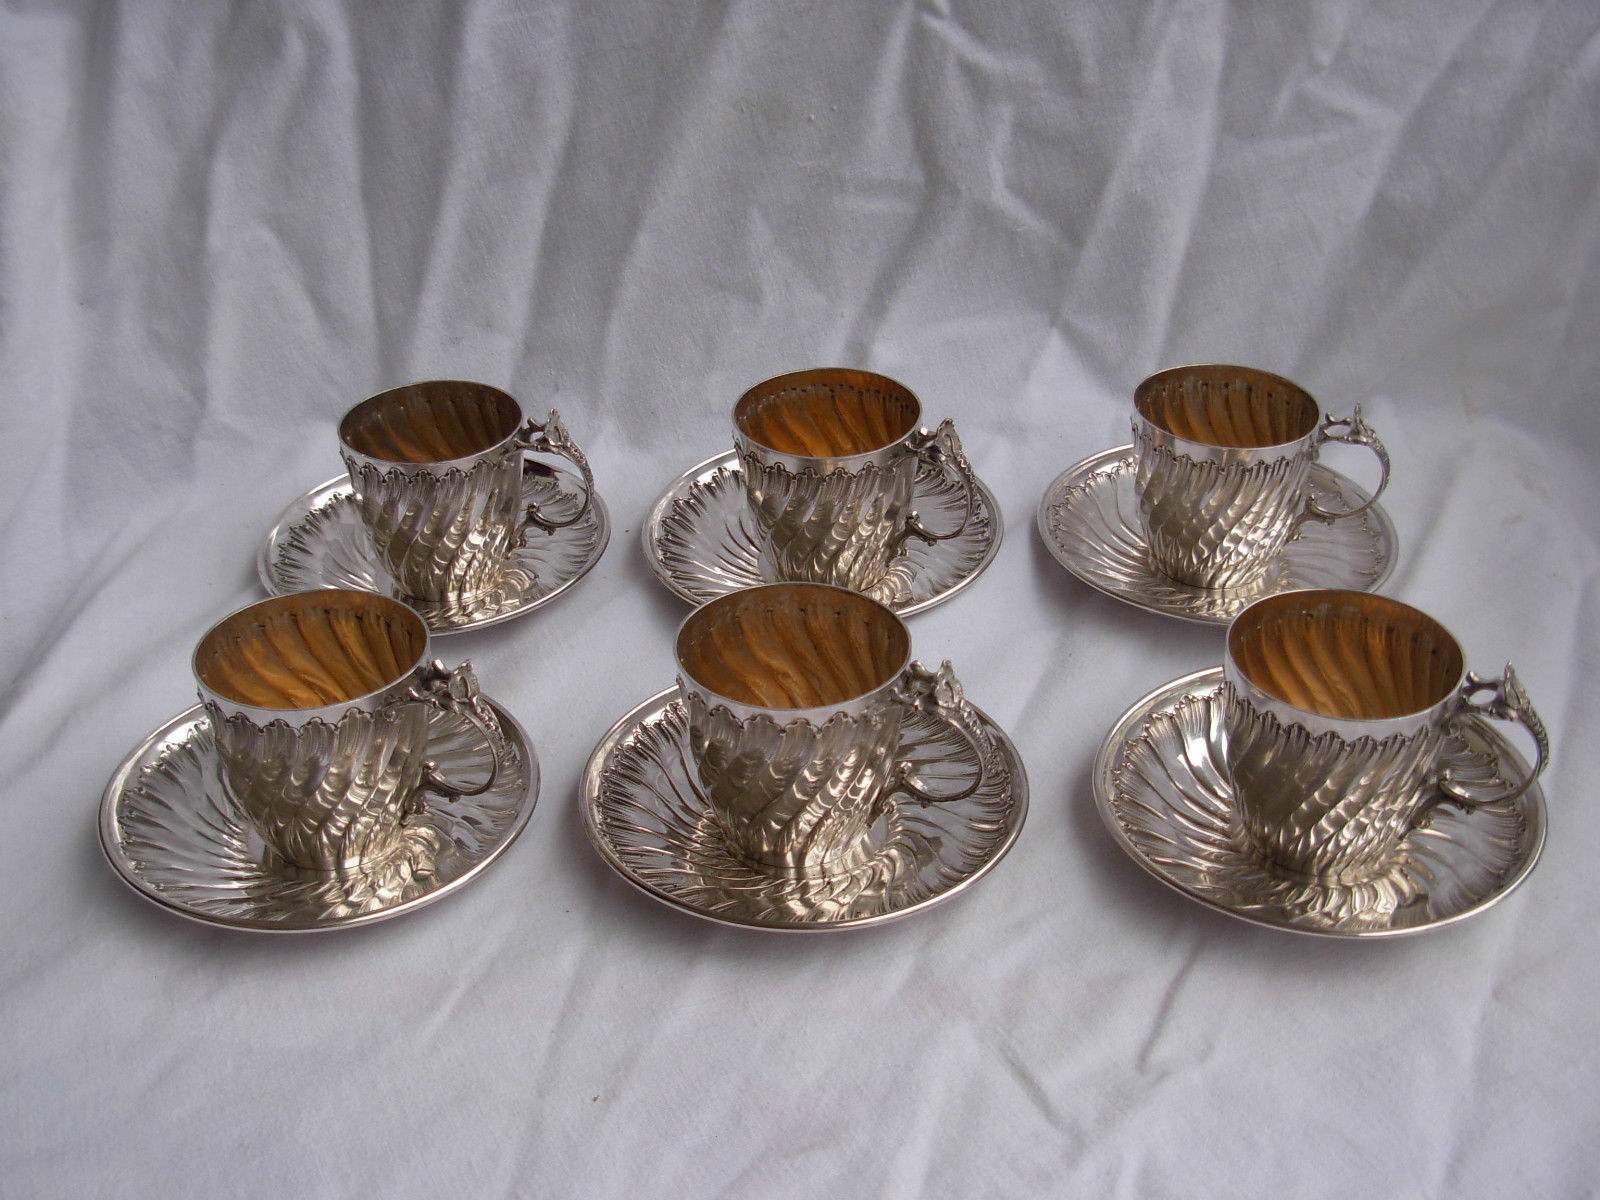 ANTIQUE FRENCH STERLING SILVER COFFEE CUPS & SAUCERS,SET OF 6,LATE 19th CENTURY.